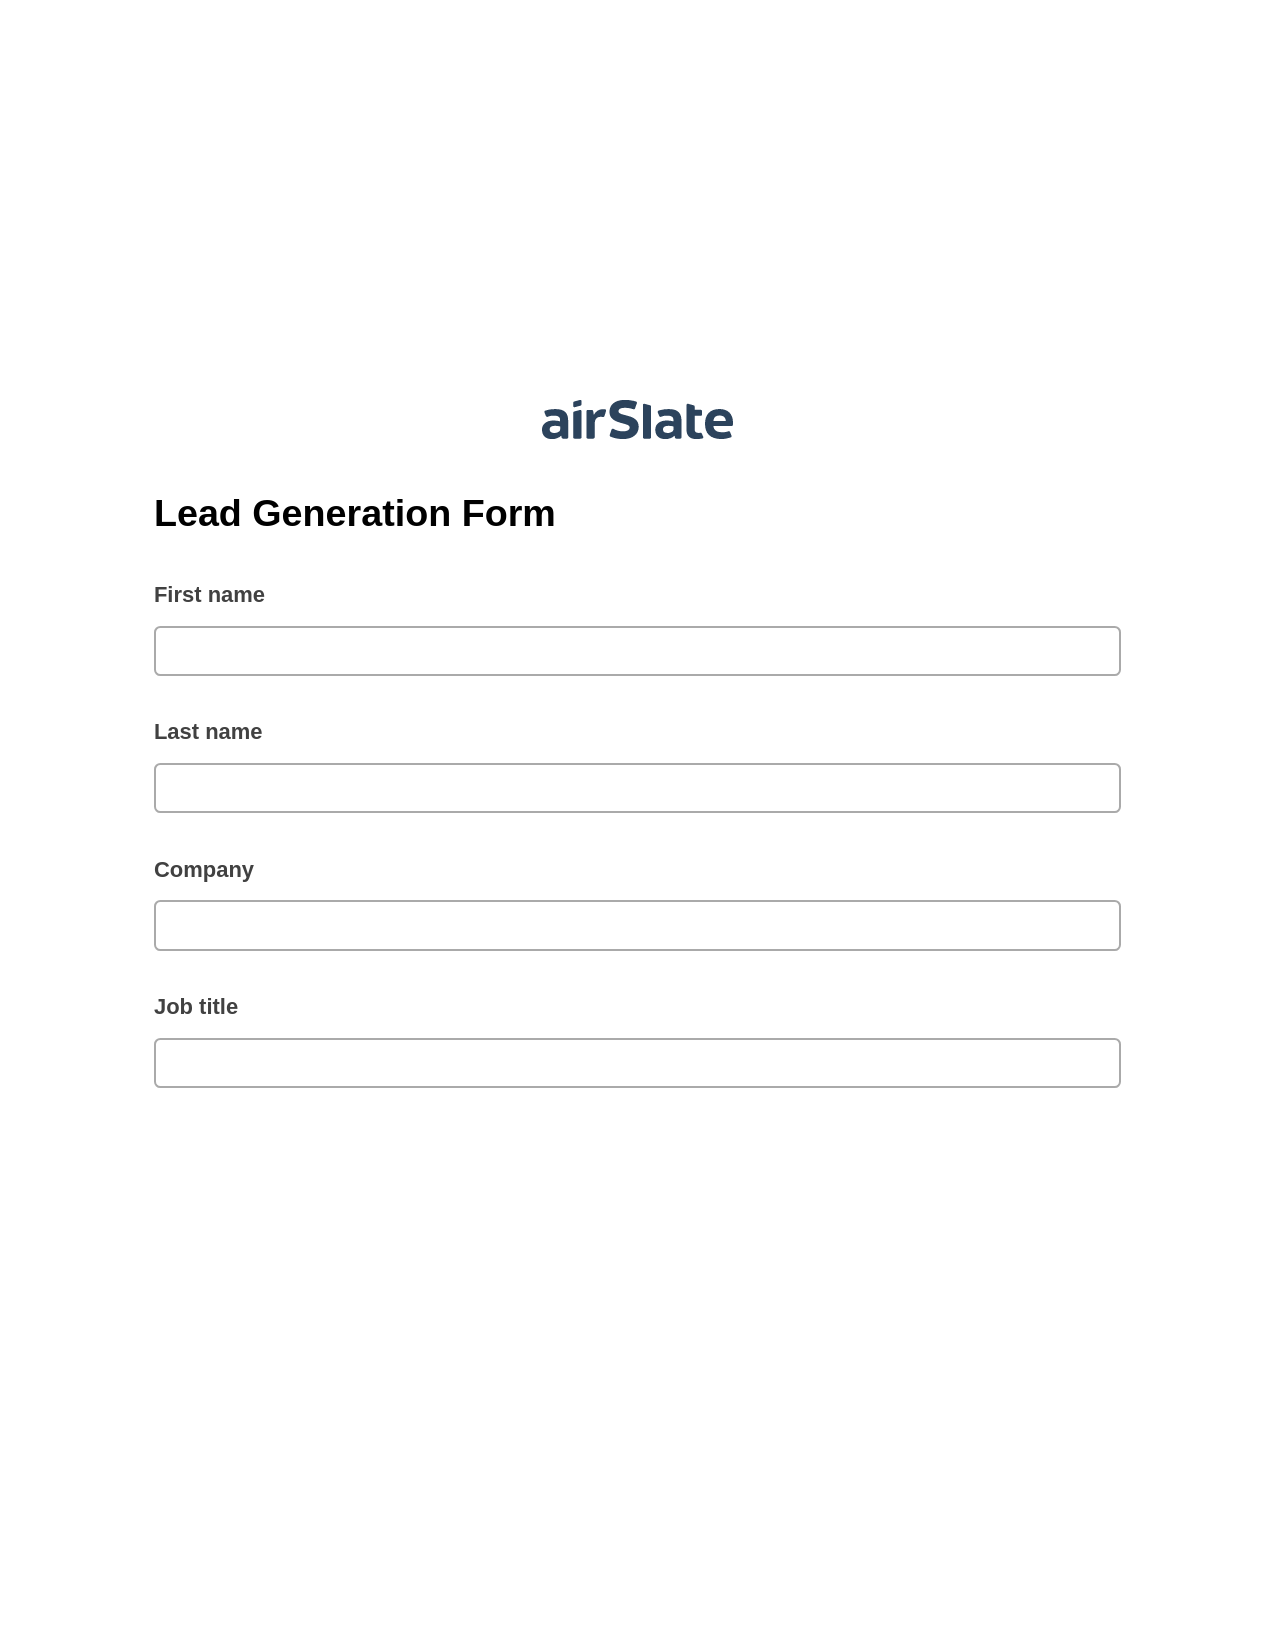 Lead Generation Form Pre-fill from CSV File Bot, Create Slate Reminder Bot, Archive to OneDrive Bot